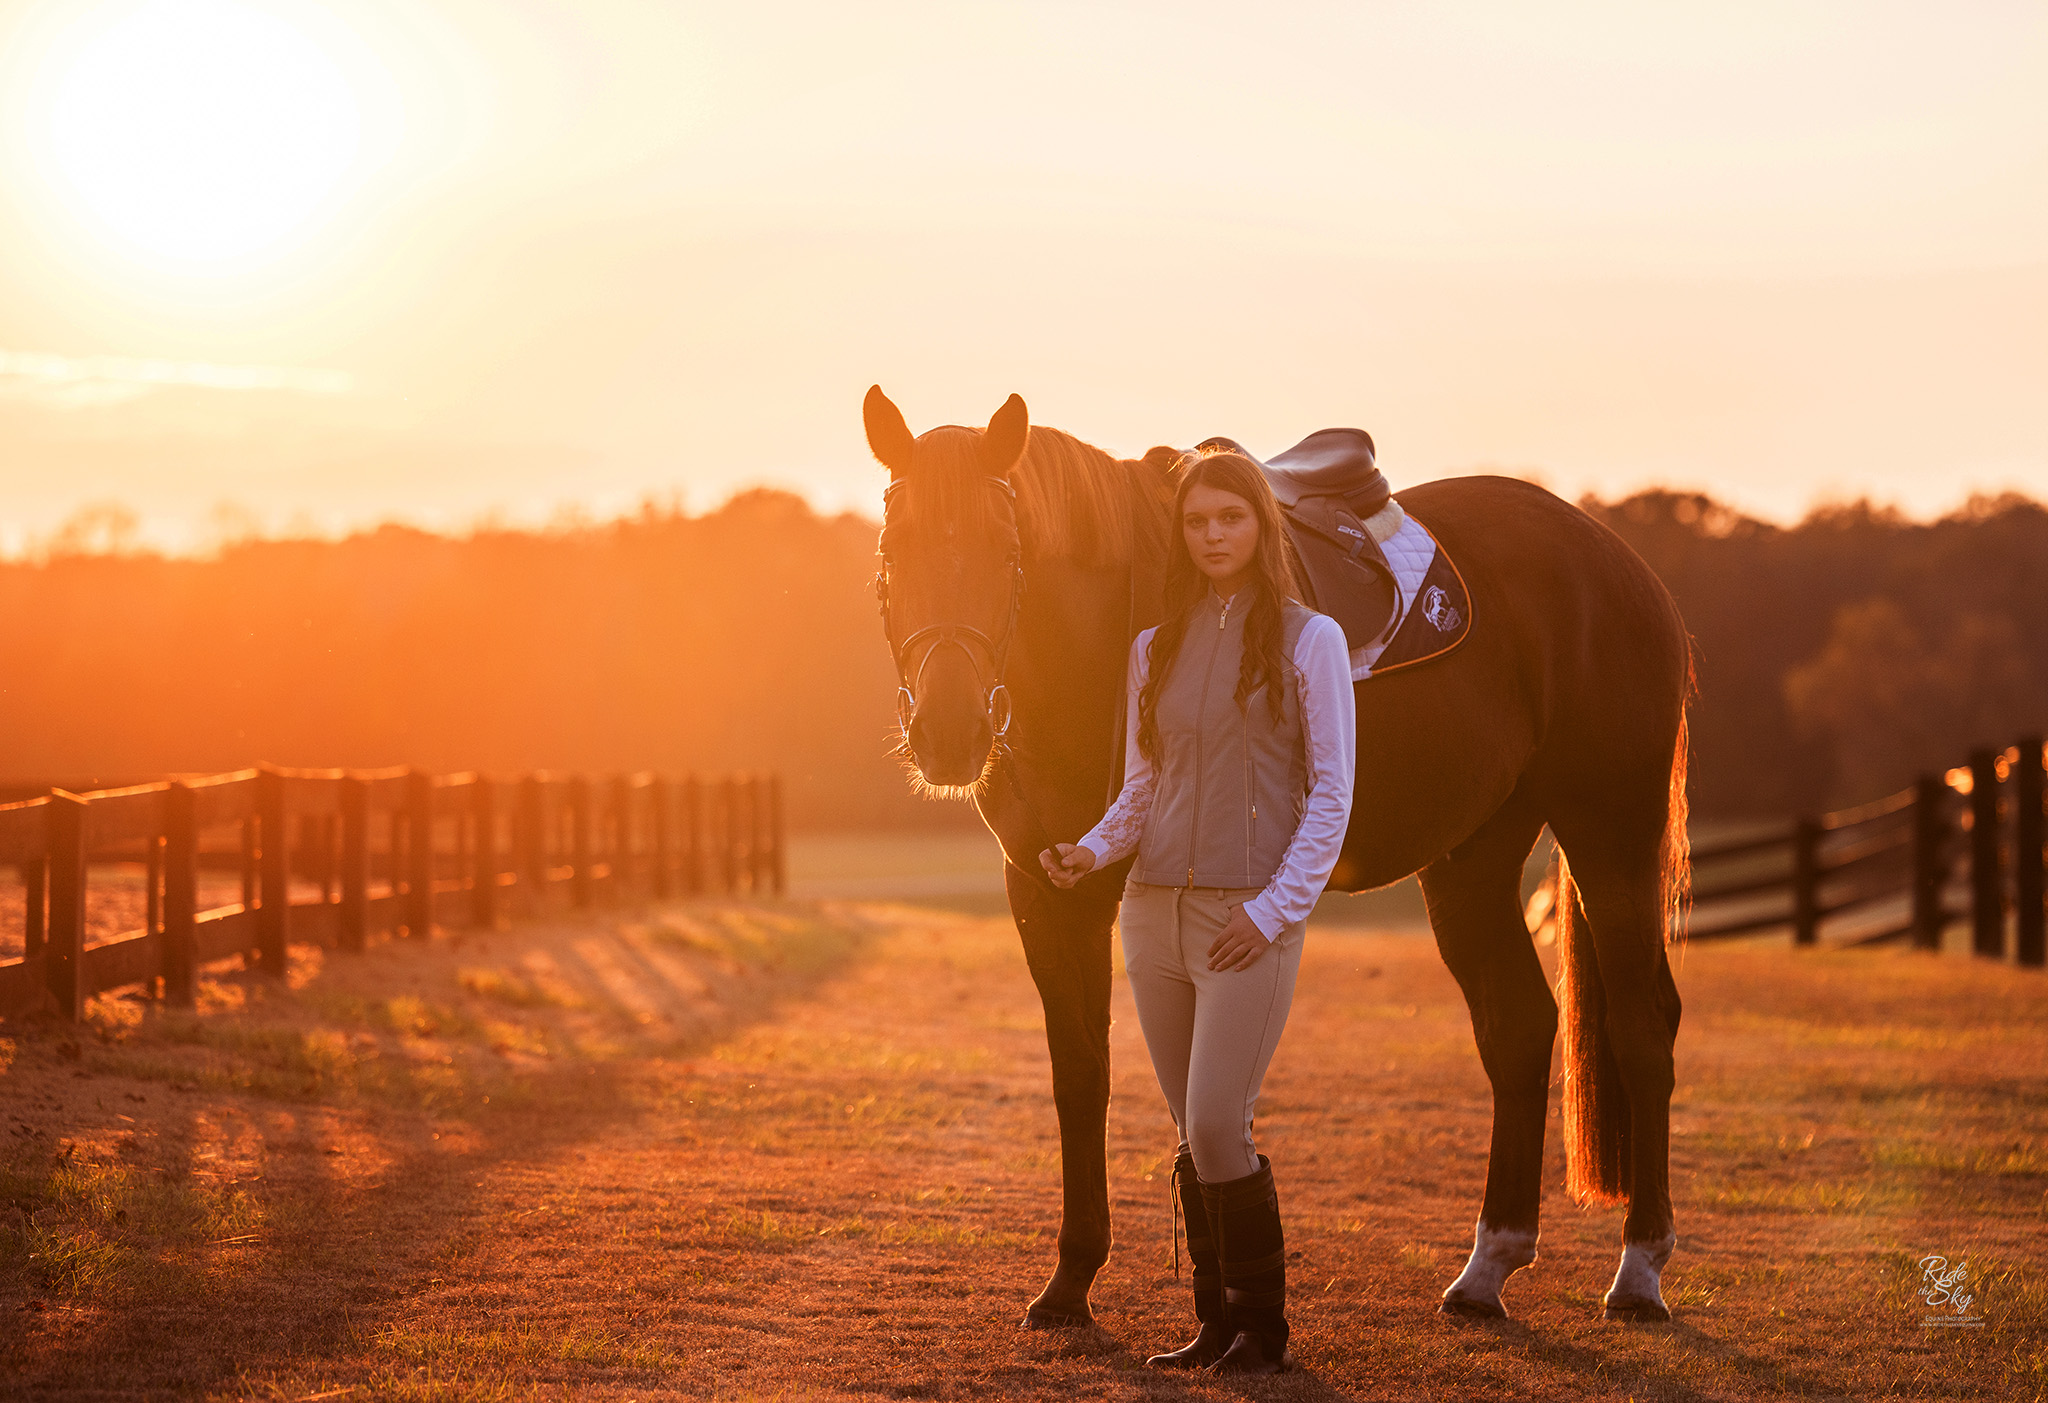 High School Senior photographed with her horse at sunset at Le Bonheur Equestrian